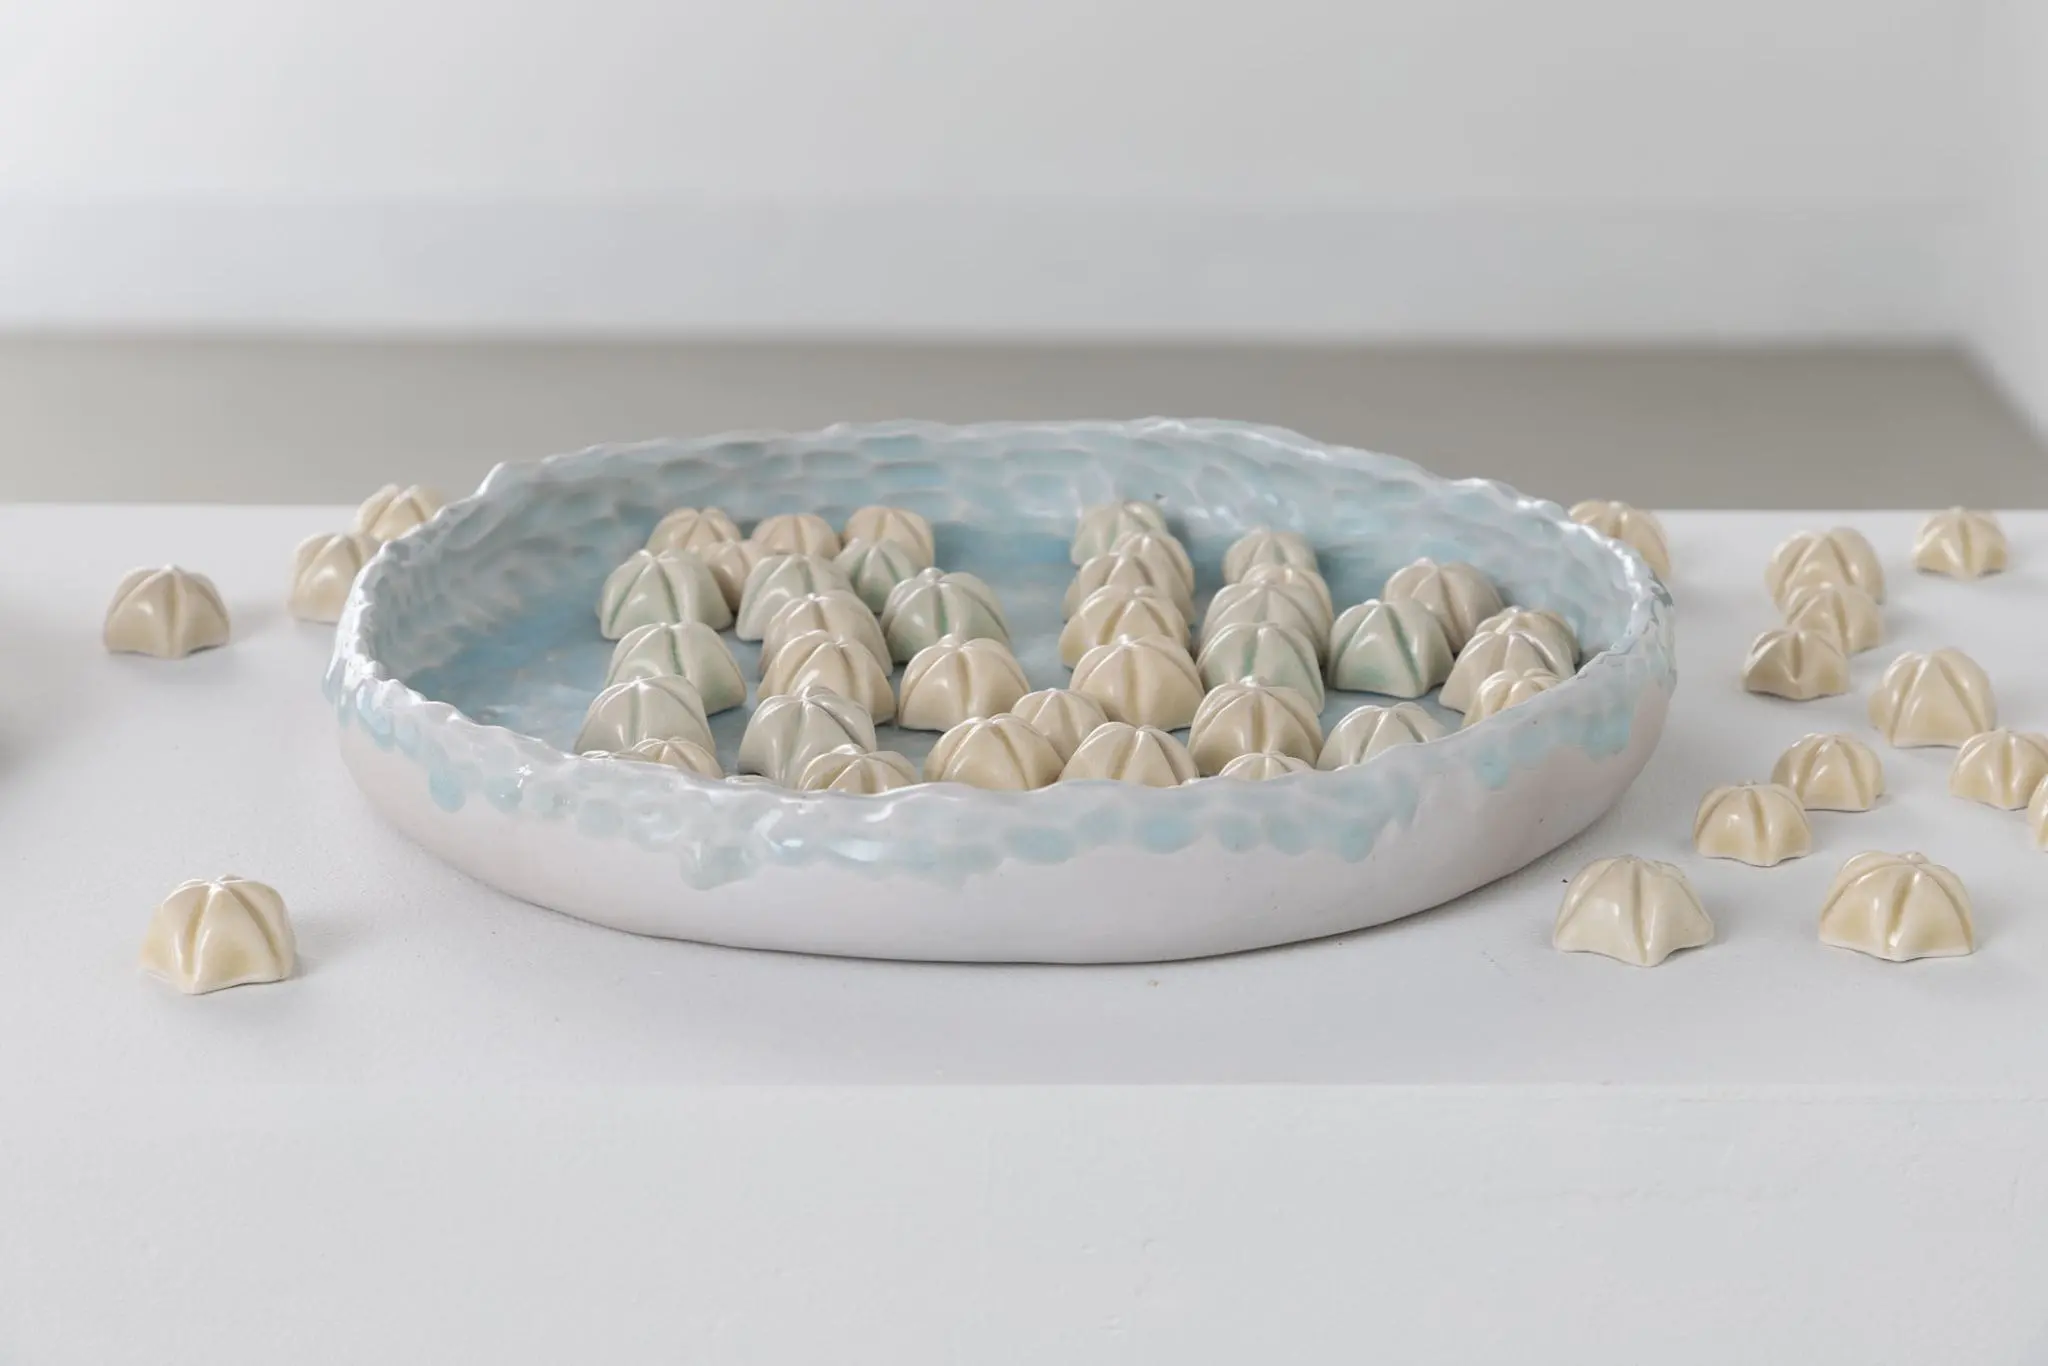 Ceramic shells inside and outside a ceramic blue-sky colored plate on a white table